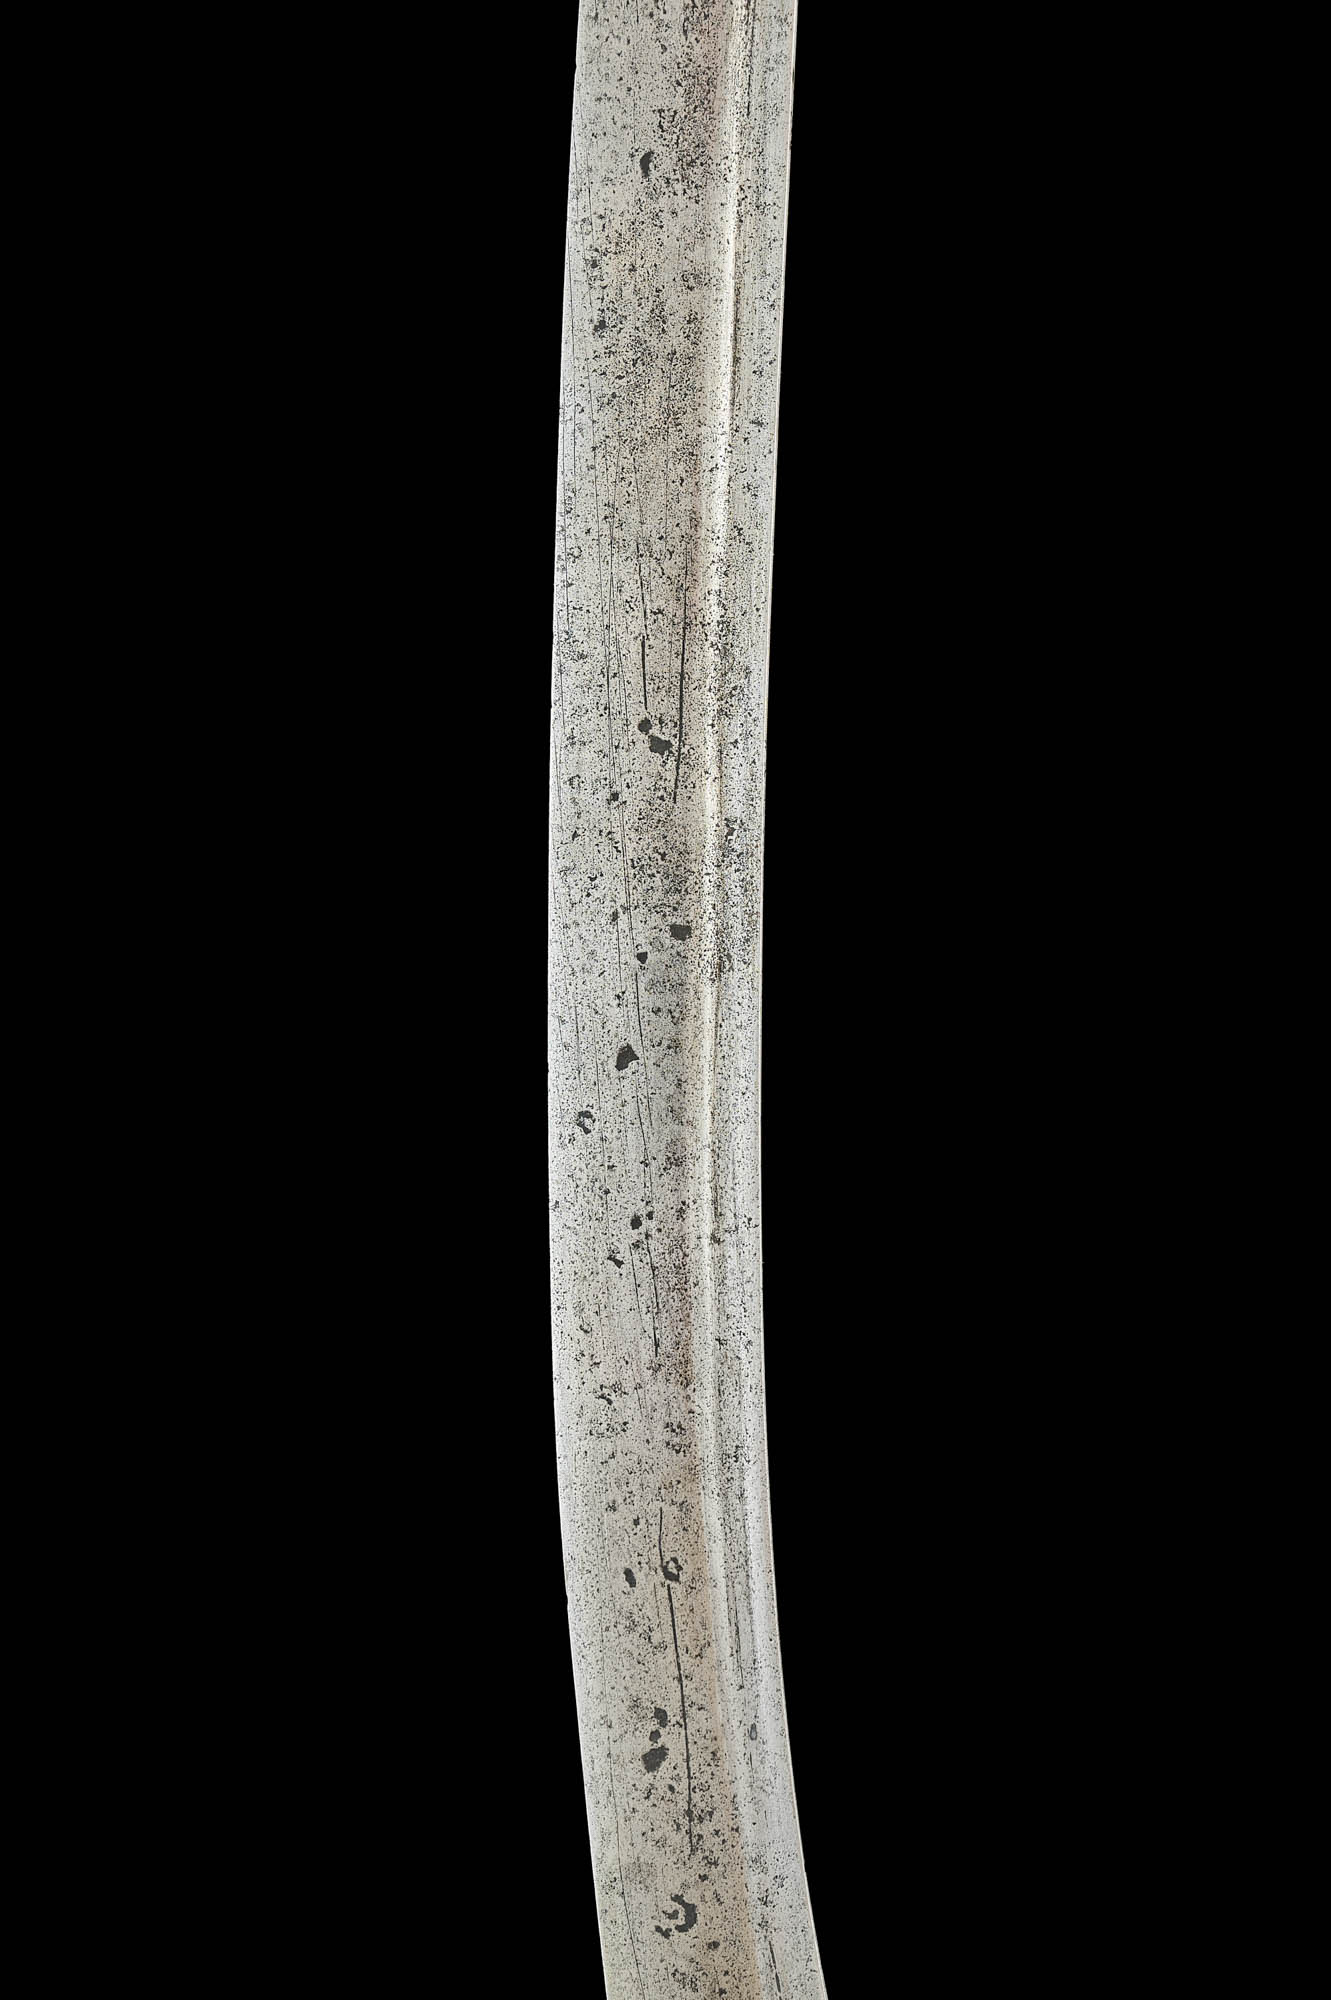 TATAR SABER SWORD DECORATED WITH RHOMBS - Image 8 of 21